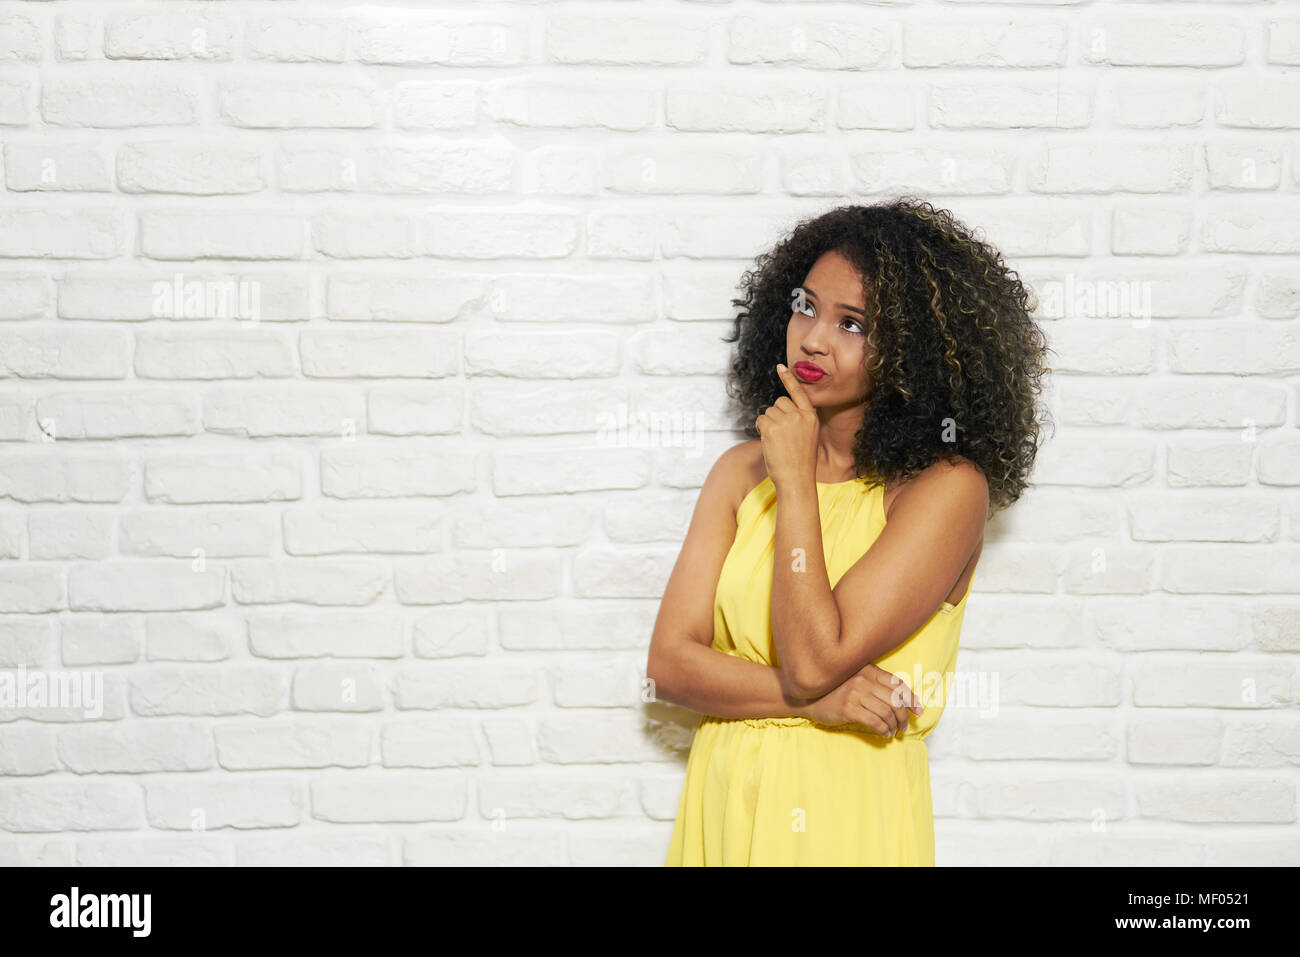 Facial Expressions Of Young Black Woman On Brick Wall Stock Photo